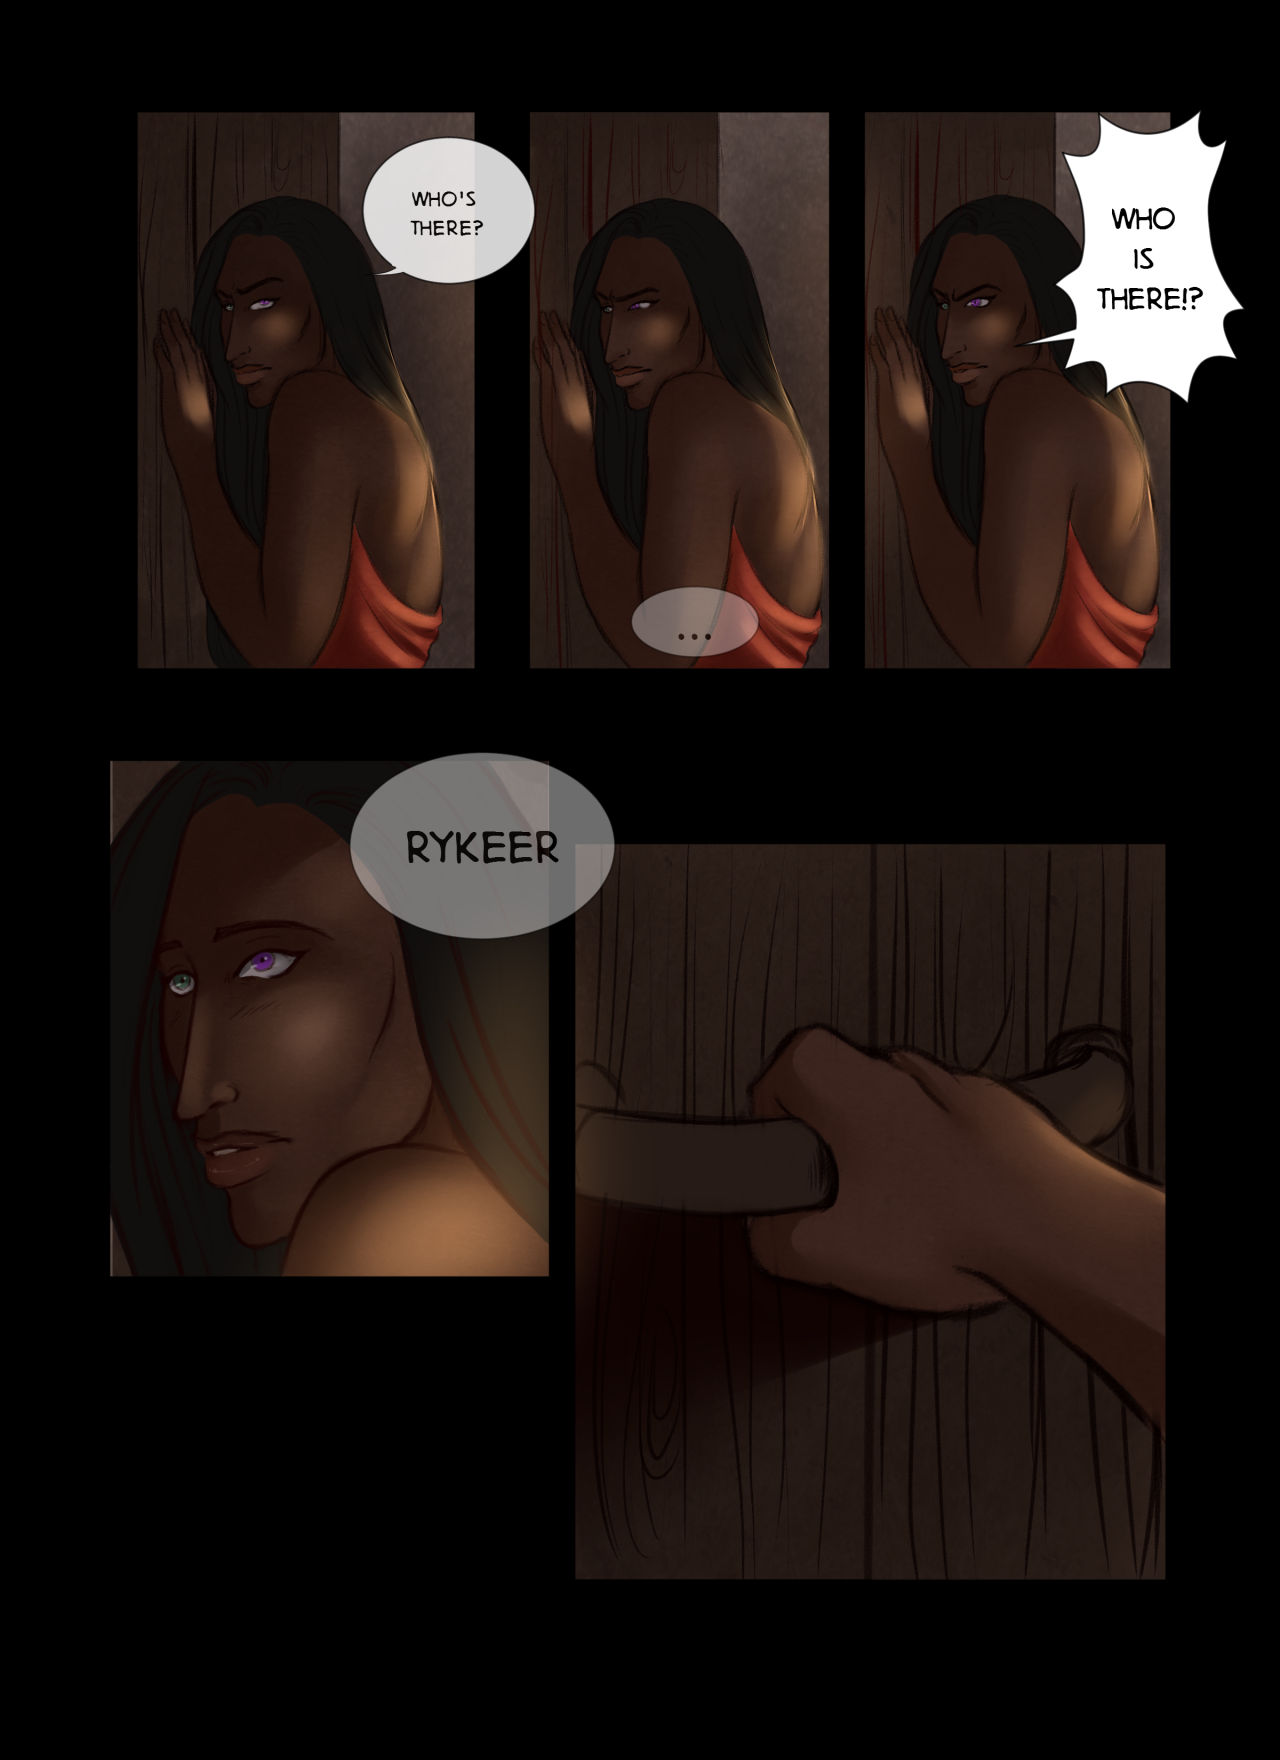 lavahanje:  Well here we go. Finally done! This is a little erotic comic featuring